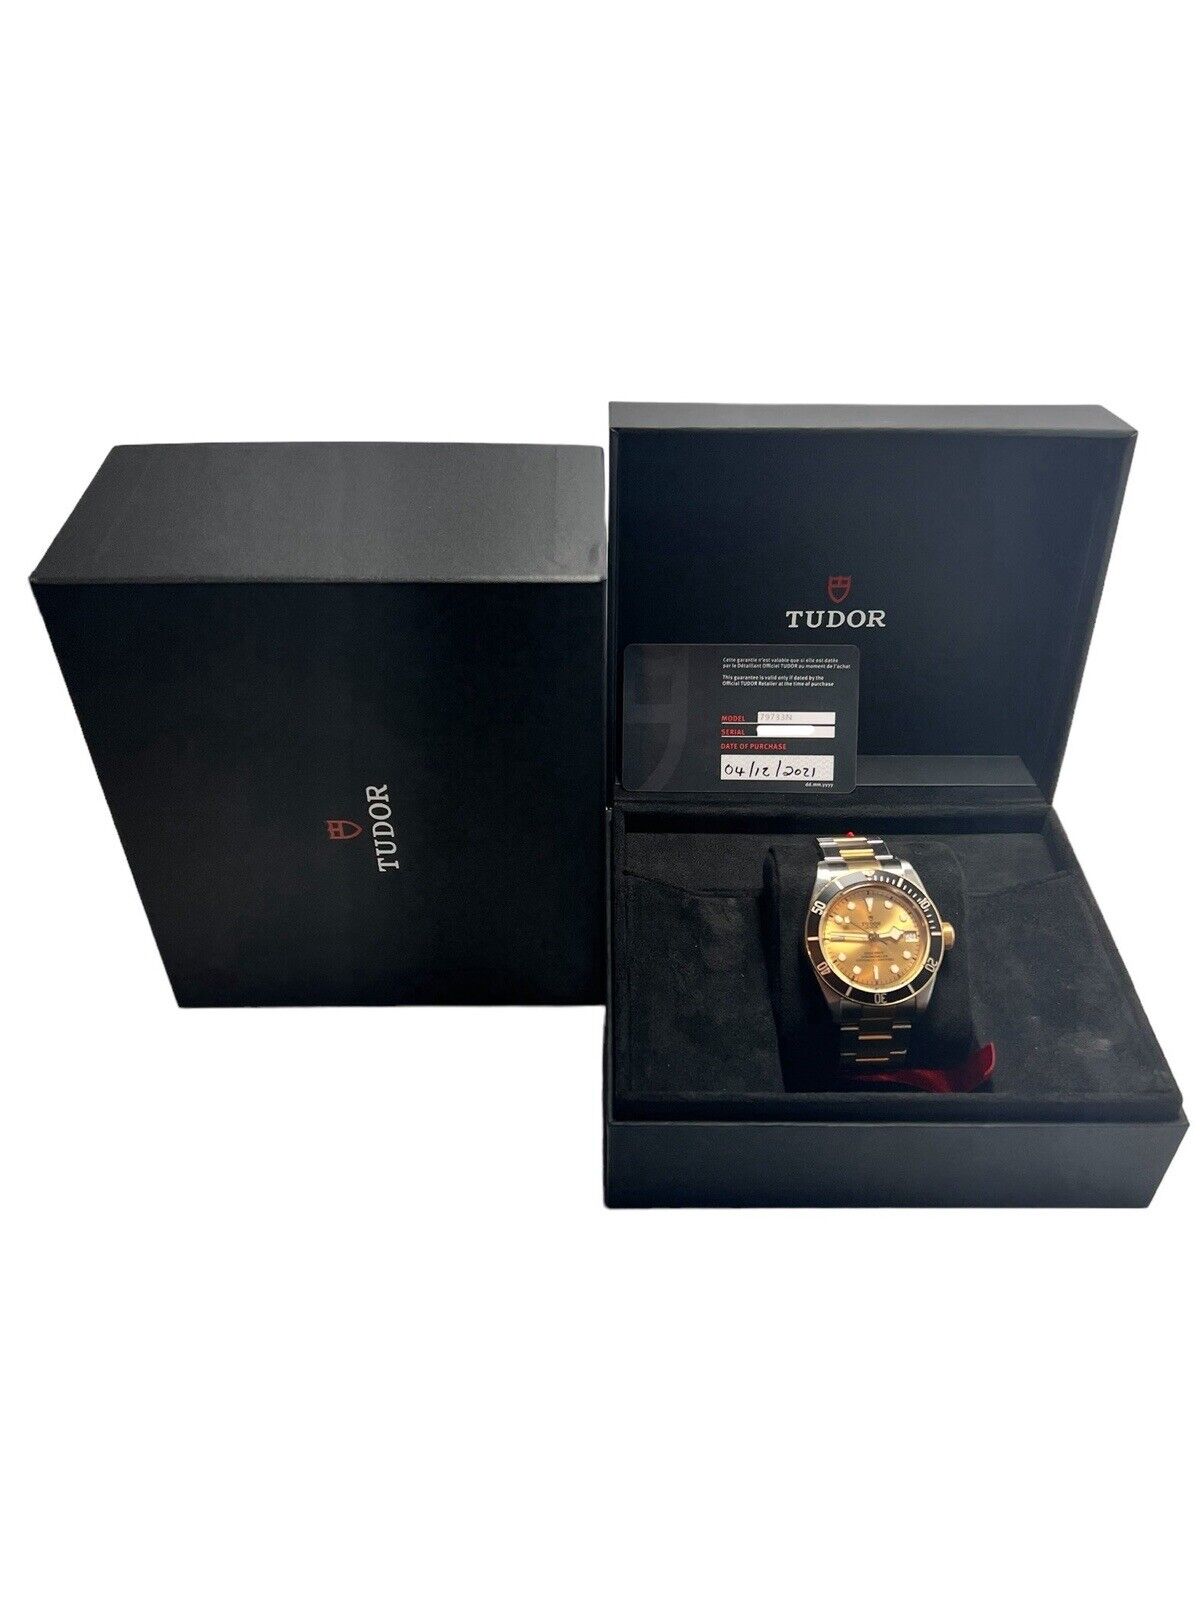 Tudor Black Bay S&G Heritage 41mm Automatic Men’s Watch 79733N - Box/Papers